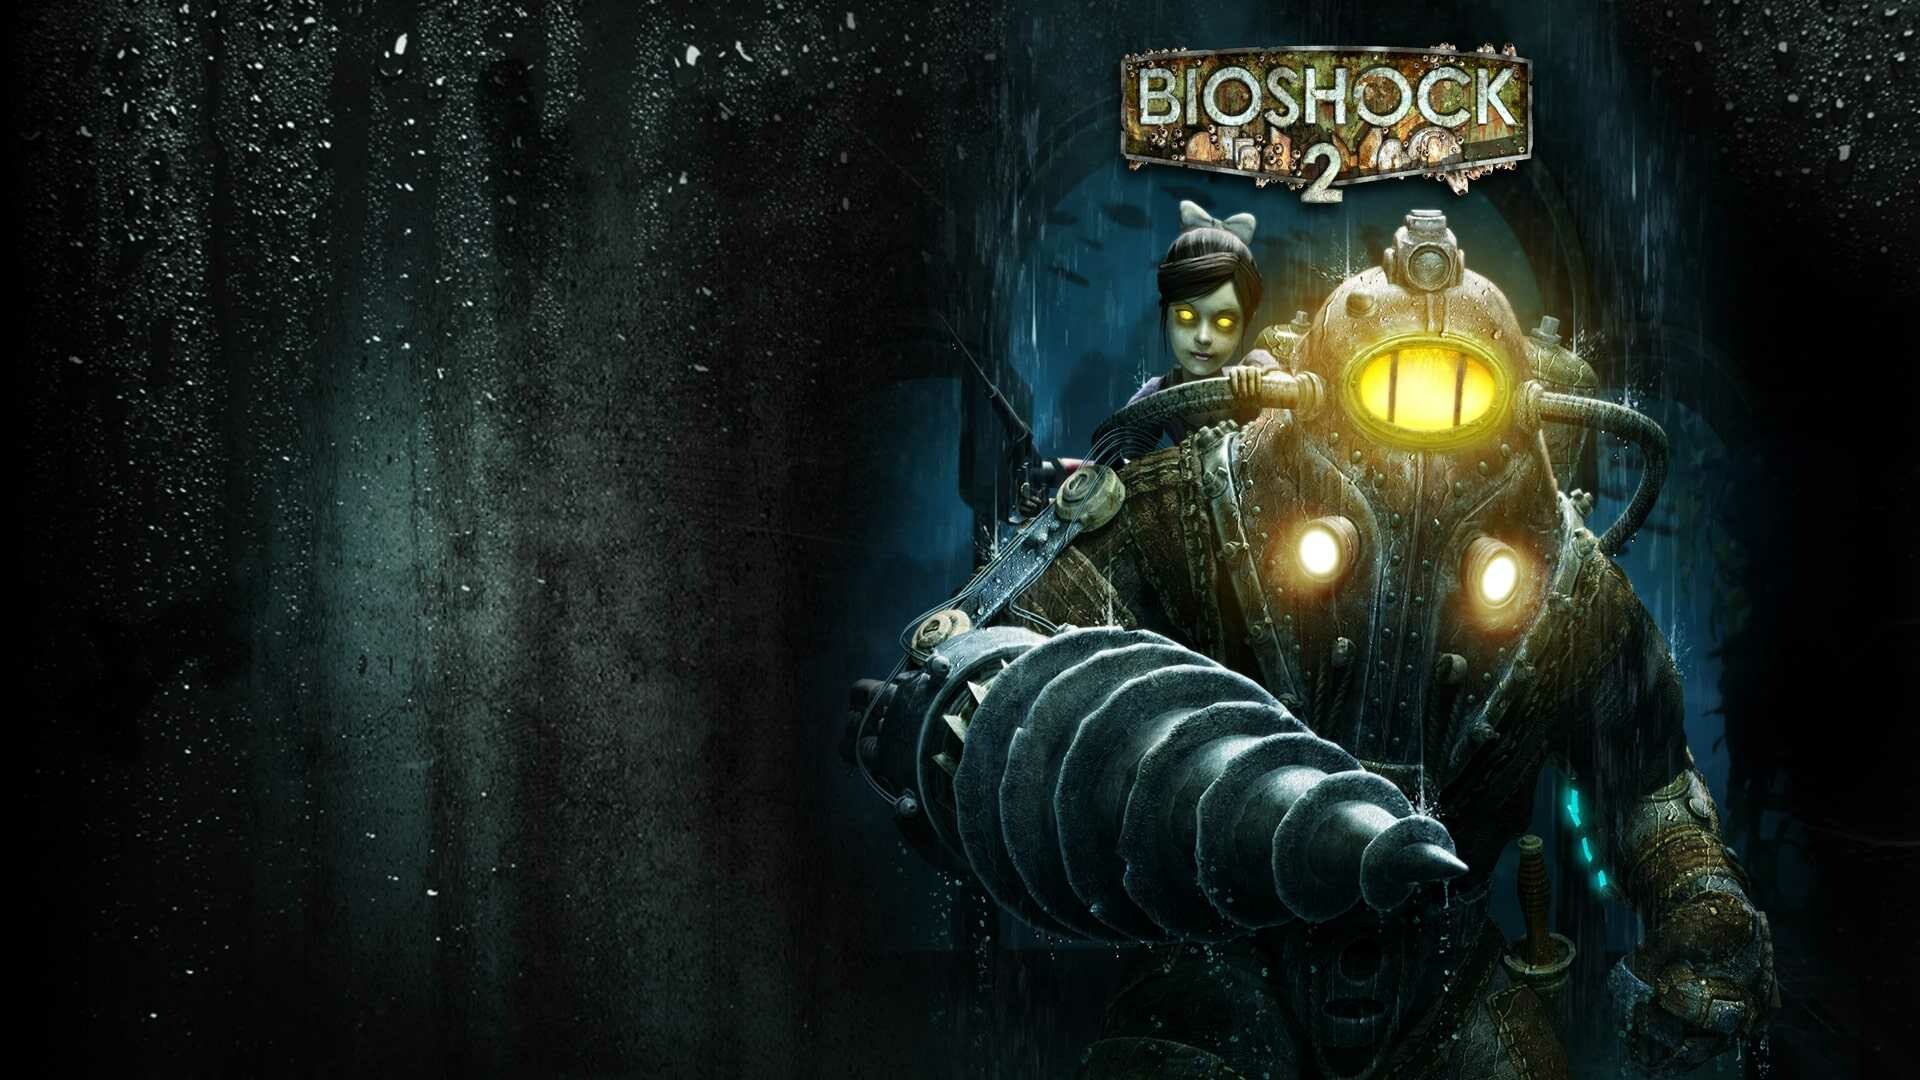 BioShock: A first-person shooter video game developed by 2K Marin and published by 2K Games. 1920x1080 Full HD Background.